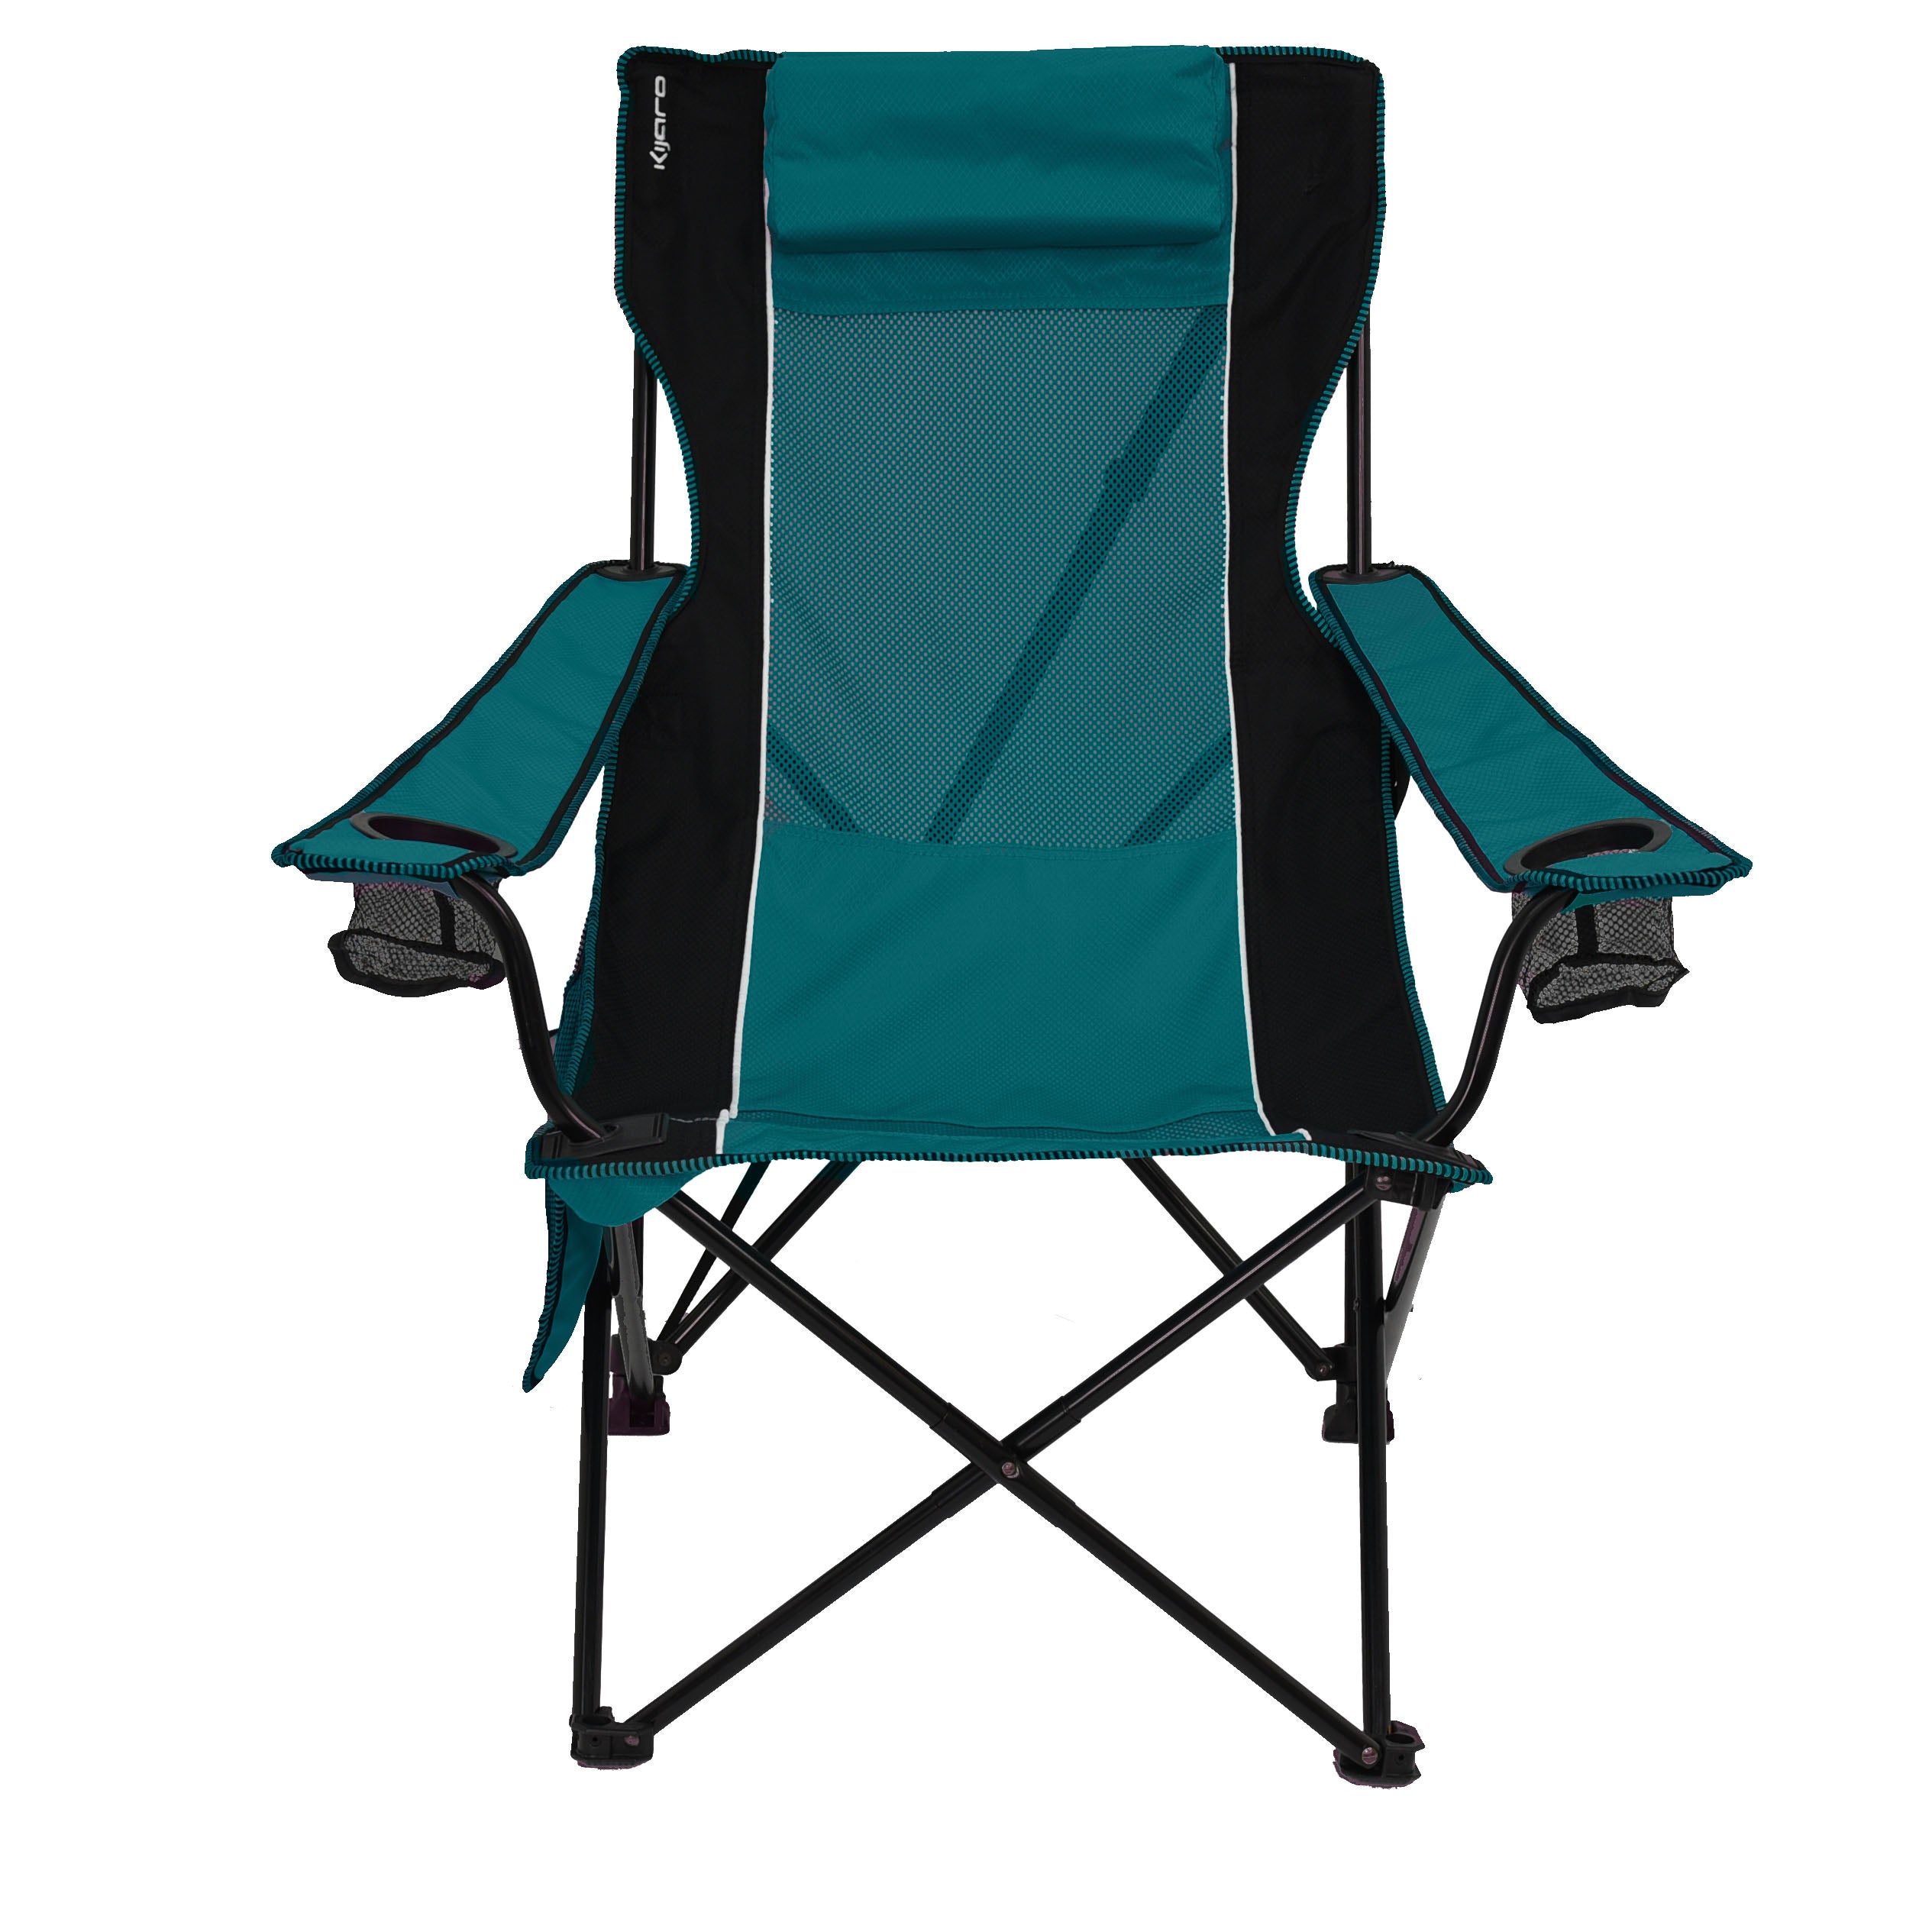 Sling Chair - 300 lb Weight Capacity